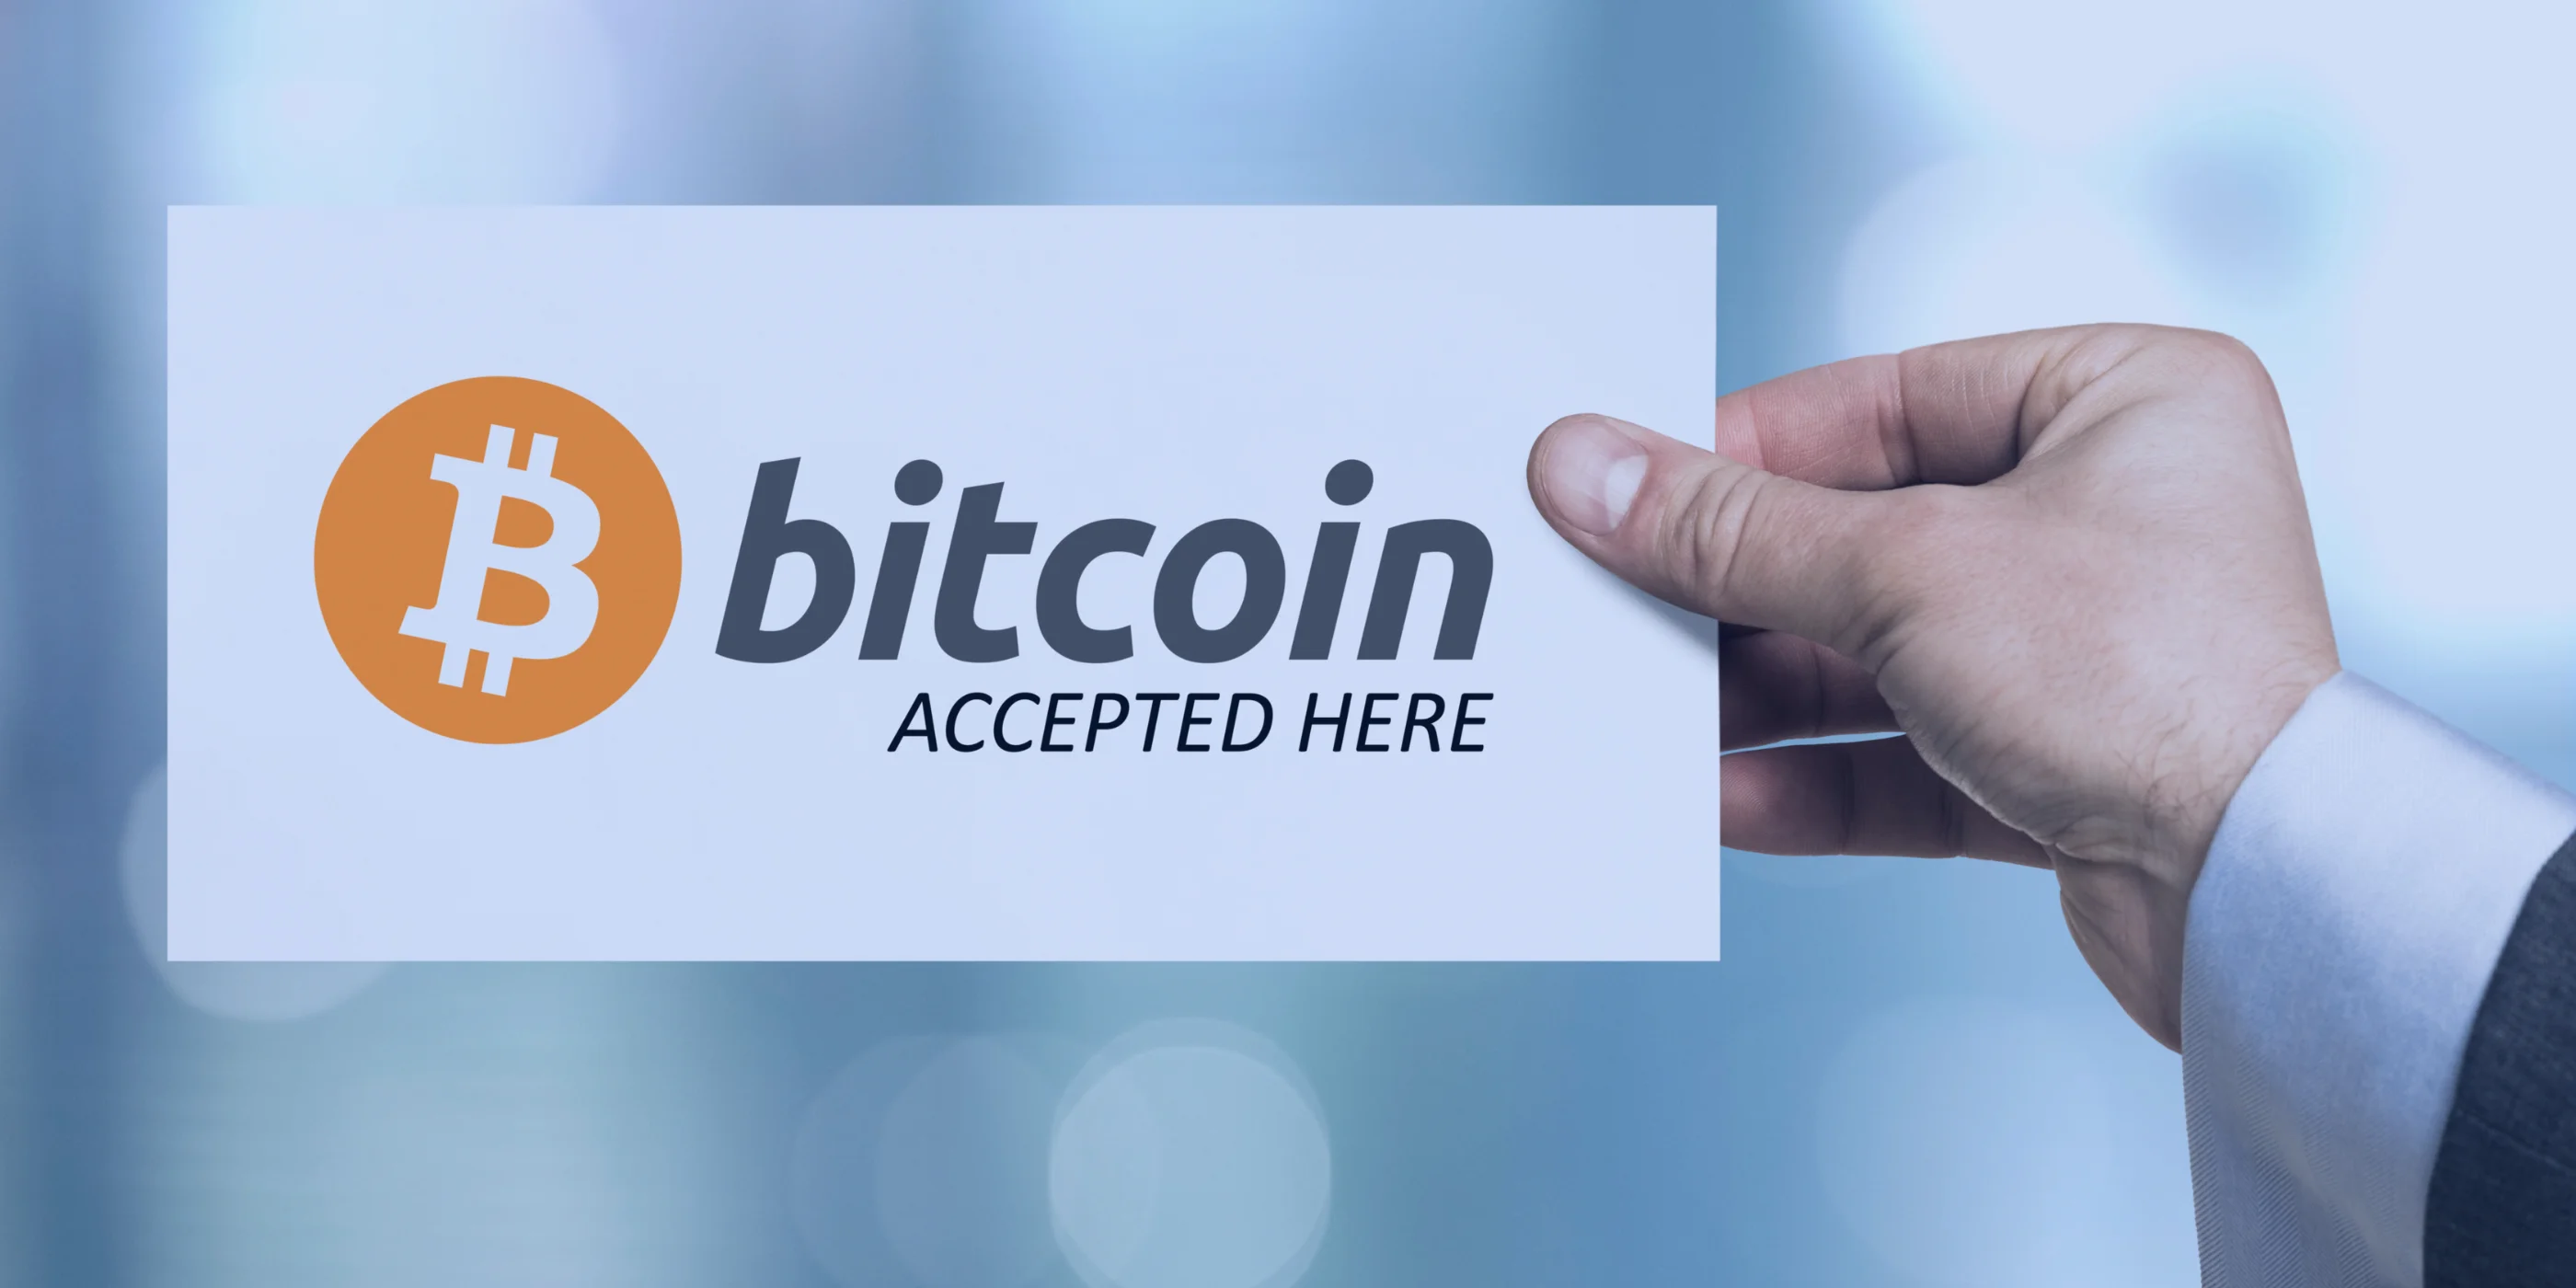 bitcoin accepted here store sign